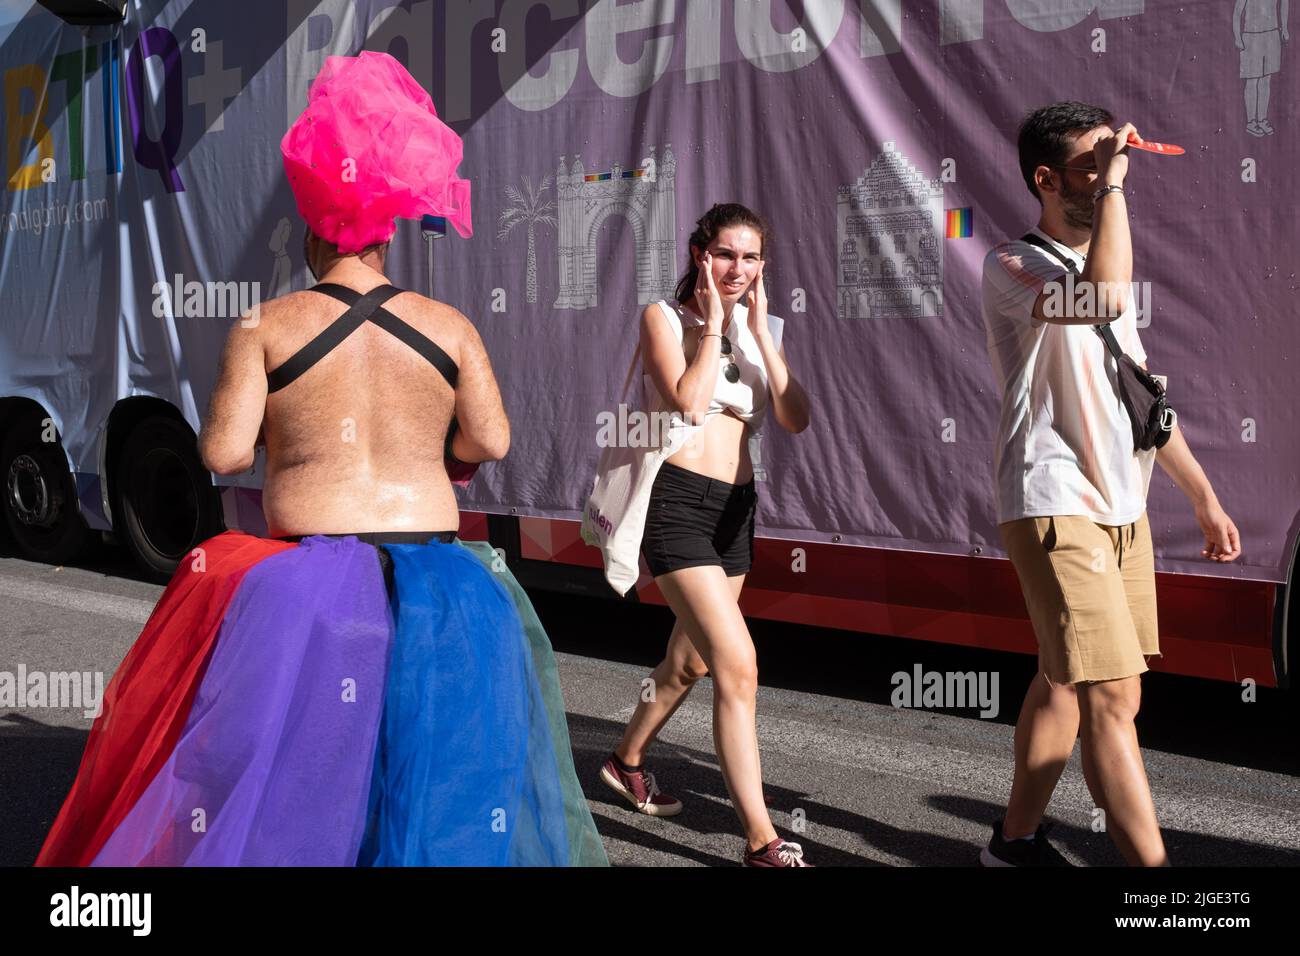 Barcelona, Spain - June 25, 2022:Gay Pride 2022. Rear view of a reveler wearing a bizarre headdress and two tourists walking in the opposite direction Stock Photo